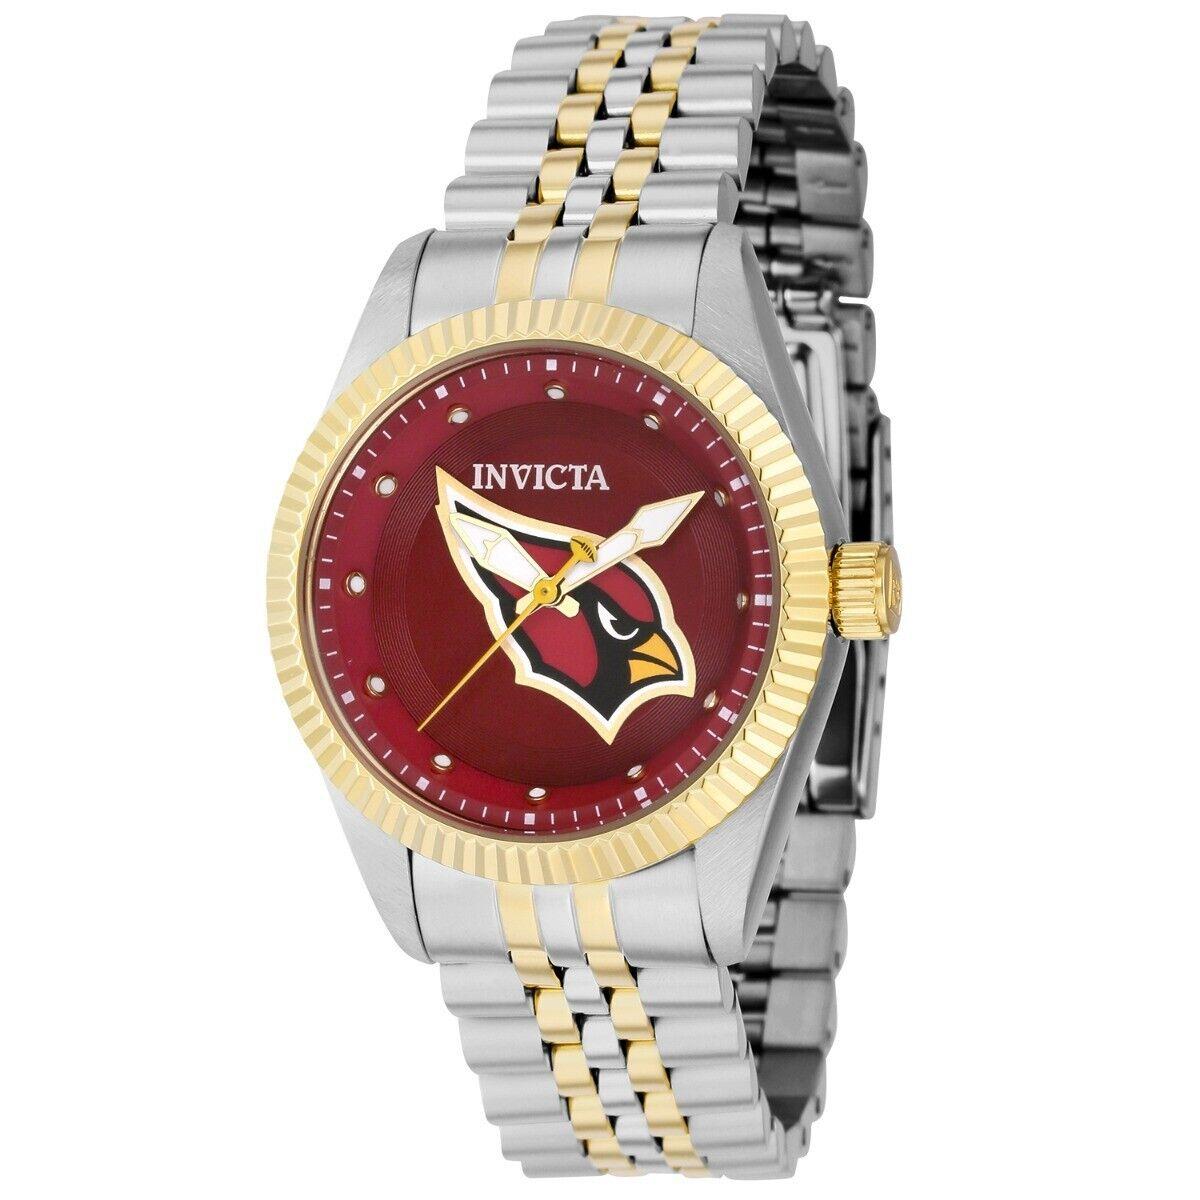 Invicta watch NFL - Gold Dial, Gold Band, Gold Bezel